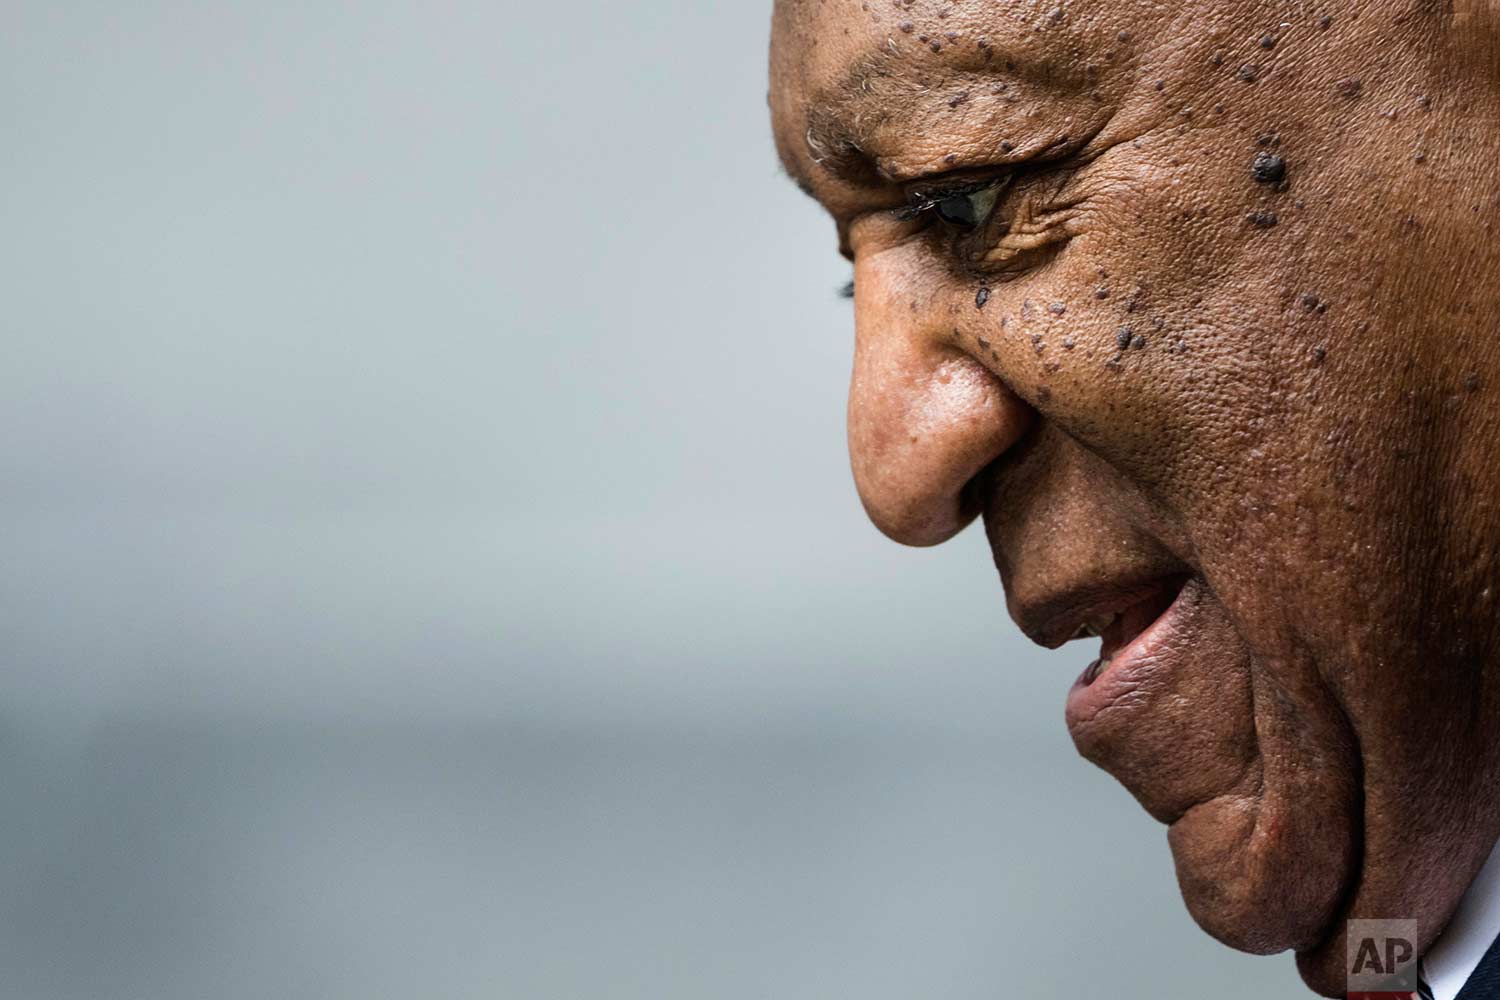  Bill Cosby departs after a pretrial hearing in his sexual assault case at the Montgomery County Courthouse in Norristown, Pa., Tuesday, Aug. 22, 2017. Cosby's retrial will be delayed as his new legal team gets up to speed on the case. (AP Photo/Matt